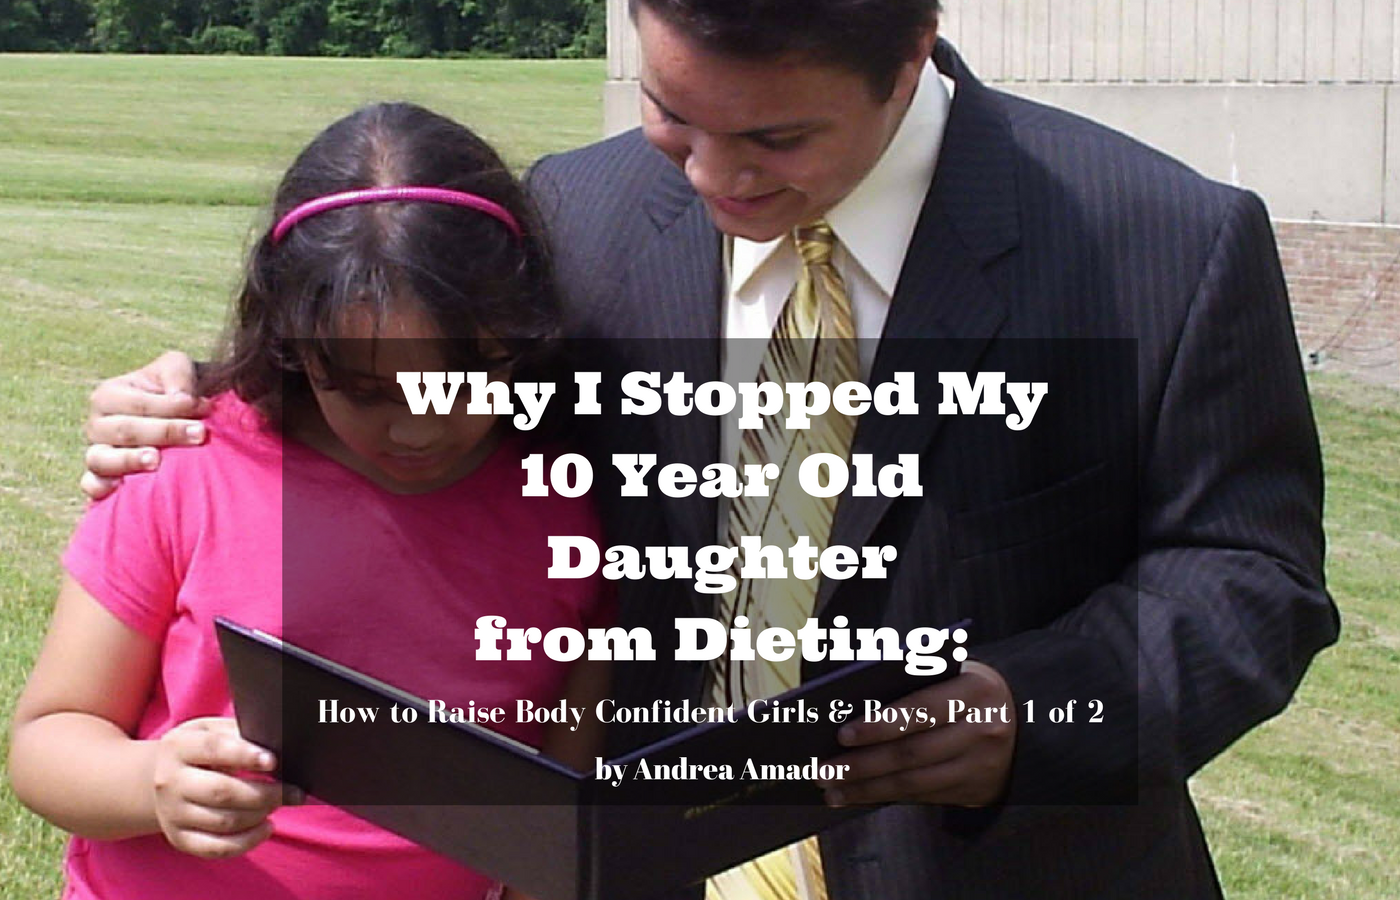 Why I Stopped My 10 Year Old Daughter from Dieting: How to Raise Body Confident Girls and Boys, Part 1 of 2